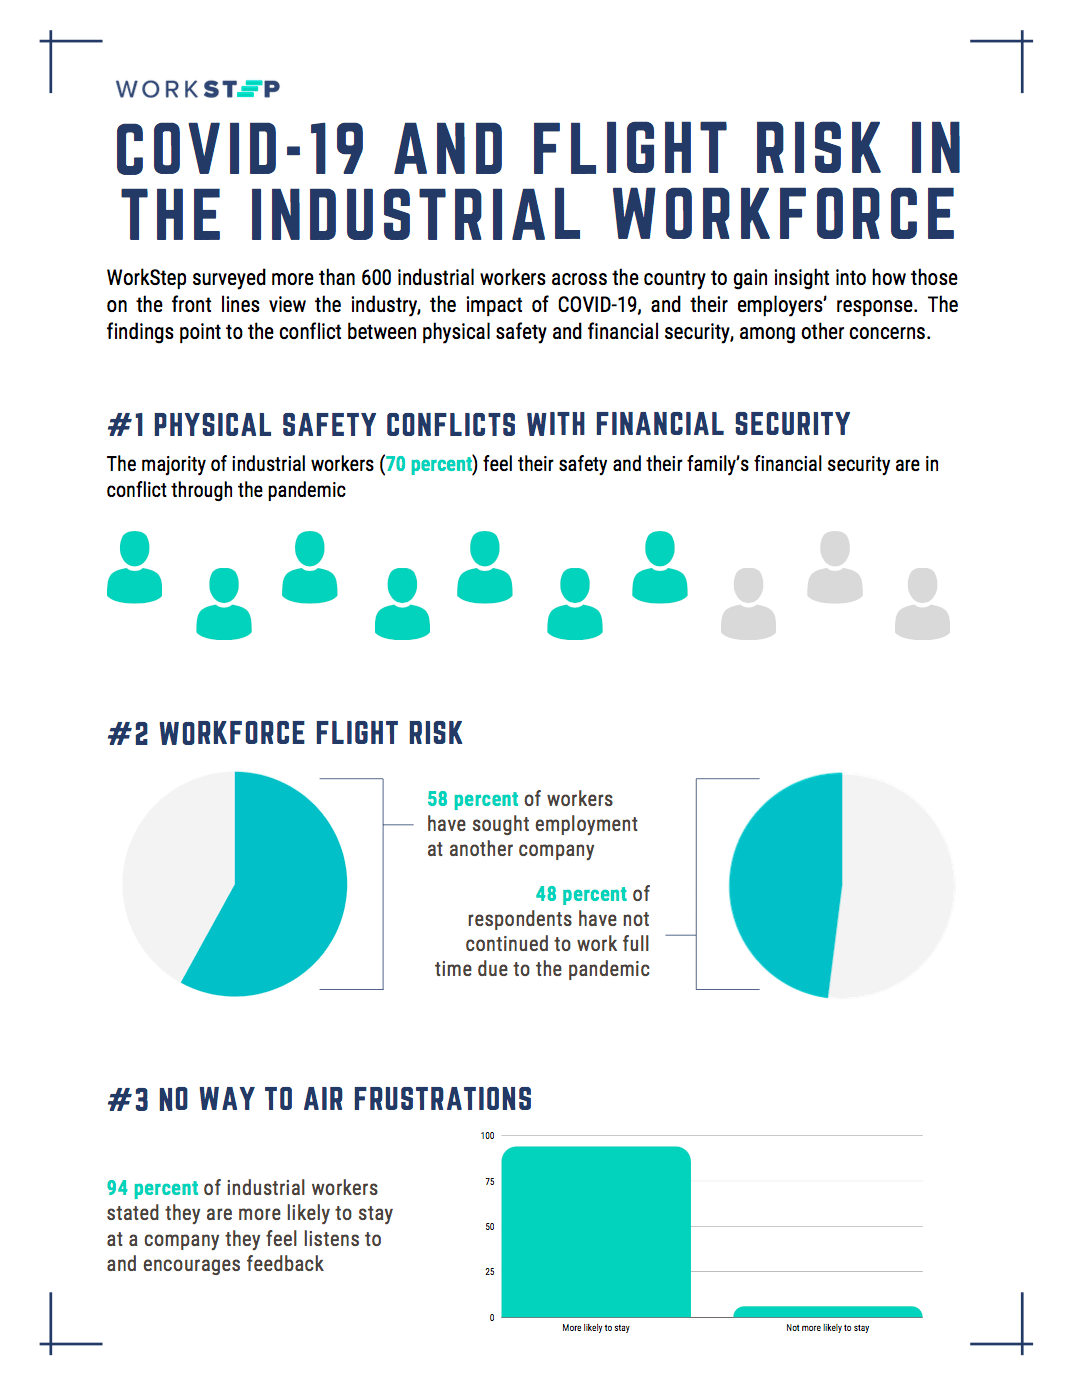 COVID-19 and flight risk in the industrial workforce infographic